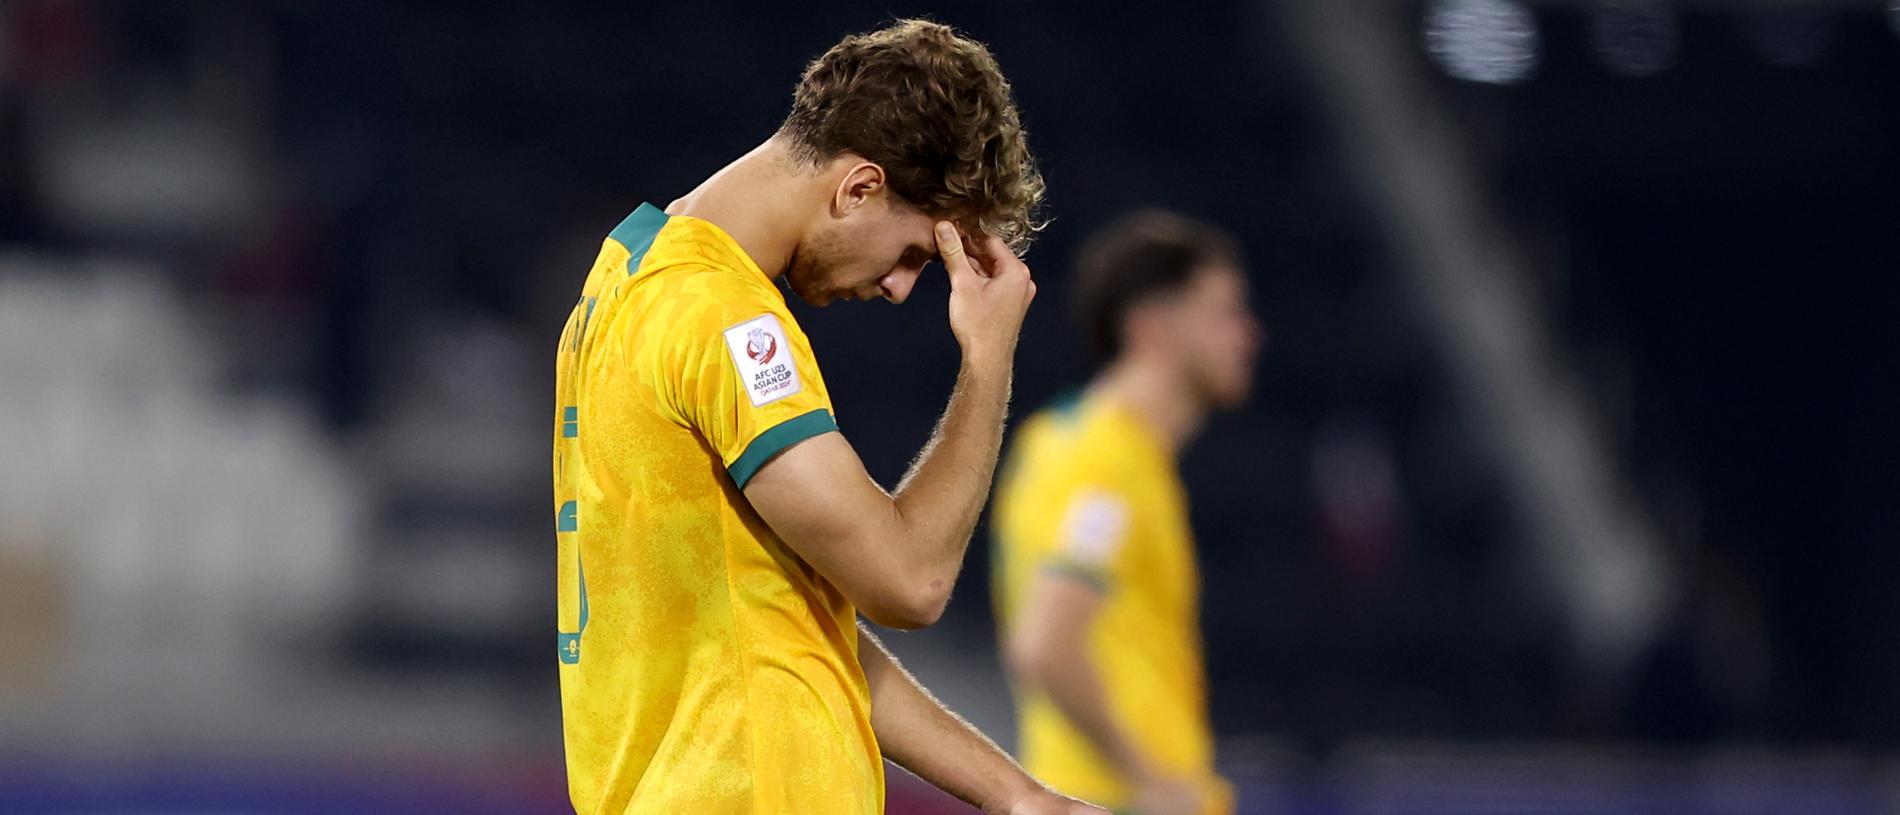 The Olyroos failed to qualify for the Olympics. (Photo by Mohamed Farag/Getty Images)